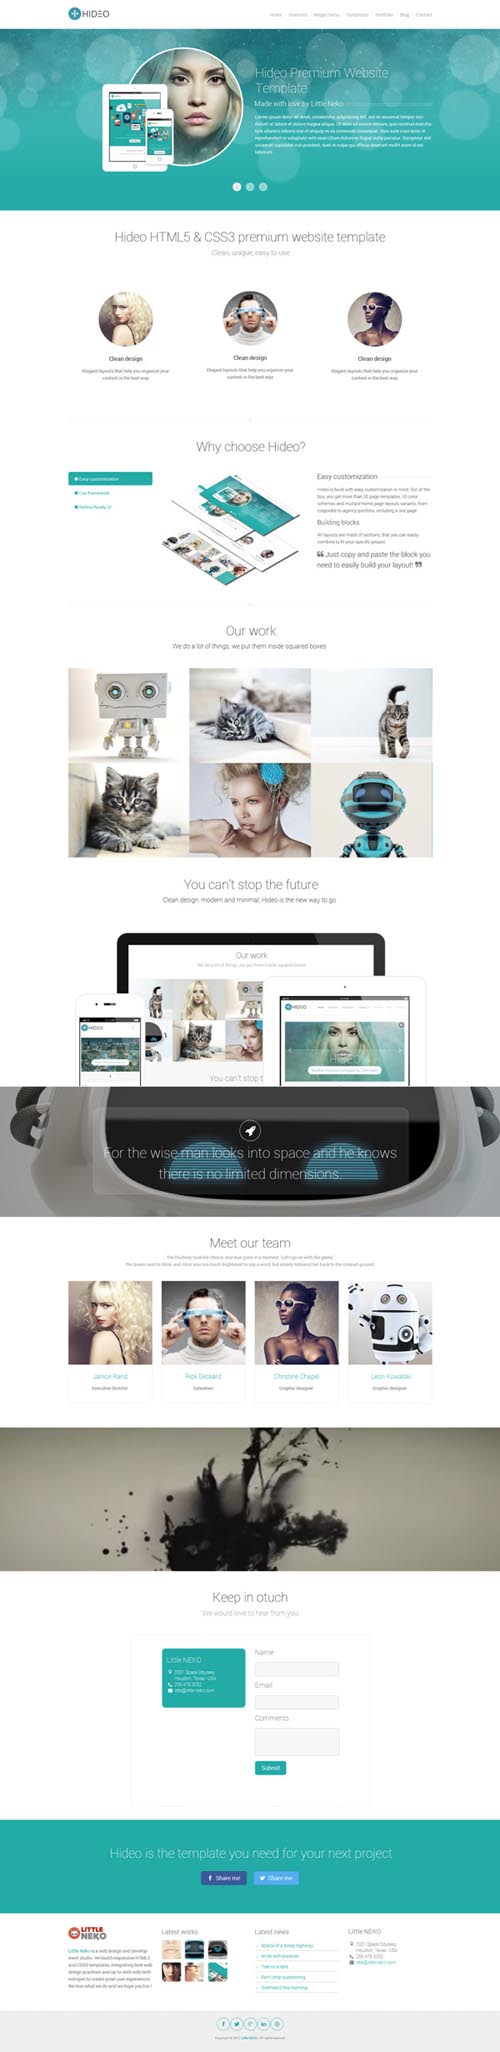 Free Hideo PSD home page web design